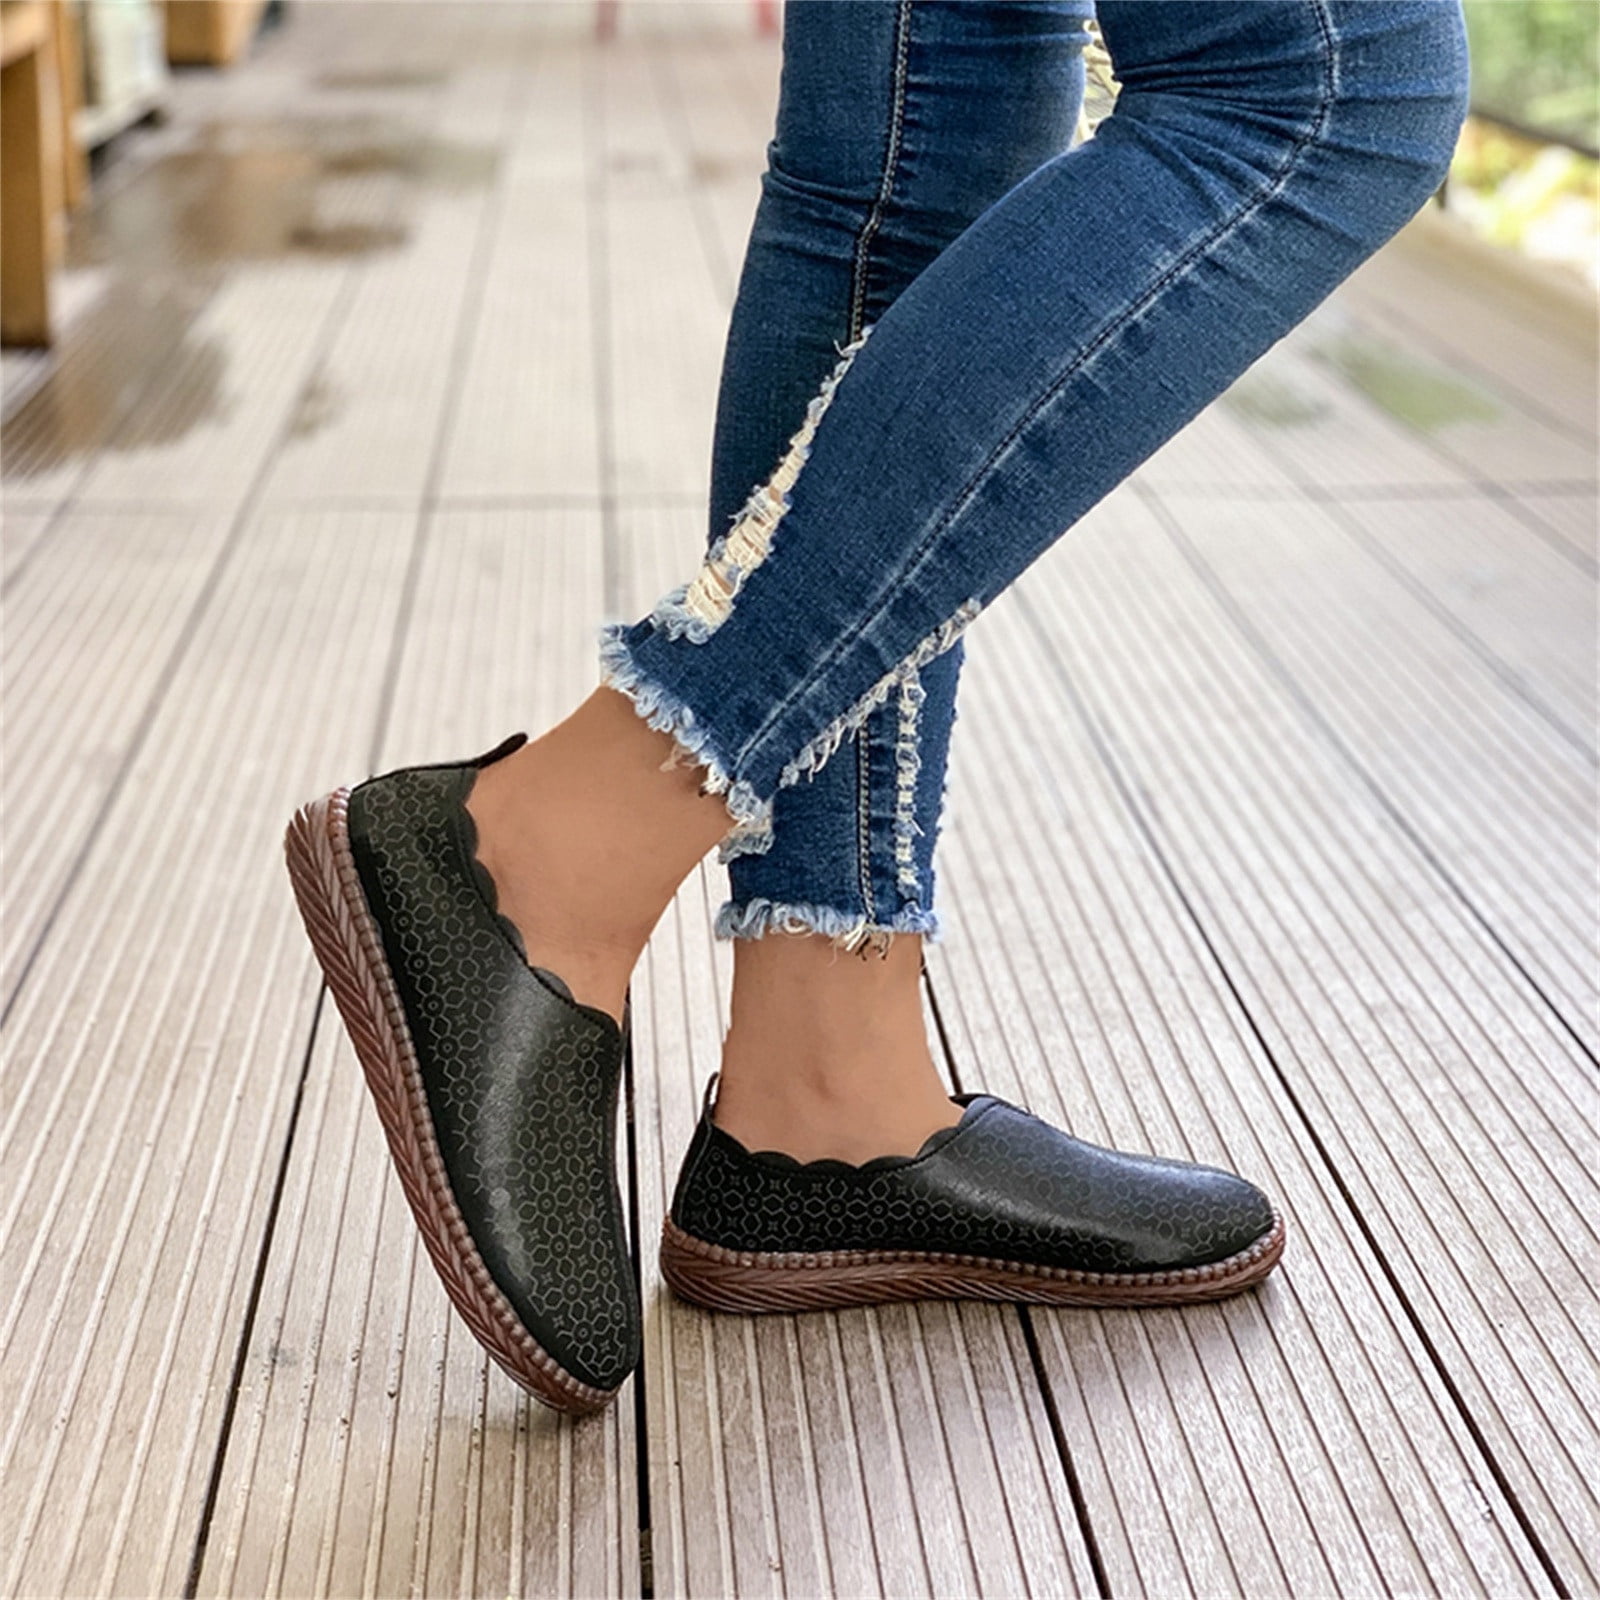 Aayomet Women Shoes Casual Slip on Ladies Fashion Solid Color Printing  Leather Round Toe Comfortable Flat Casual Shoes,Gray 9 